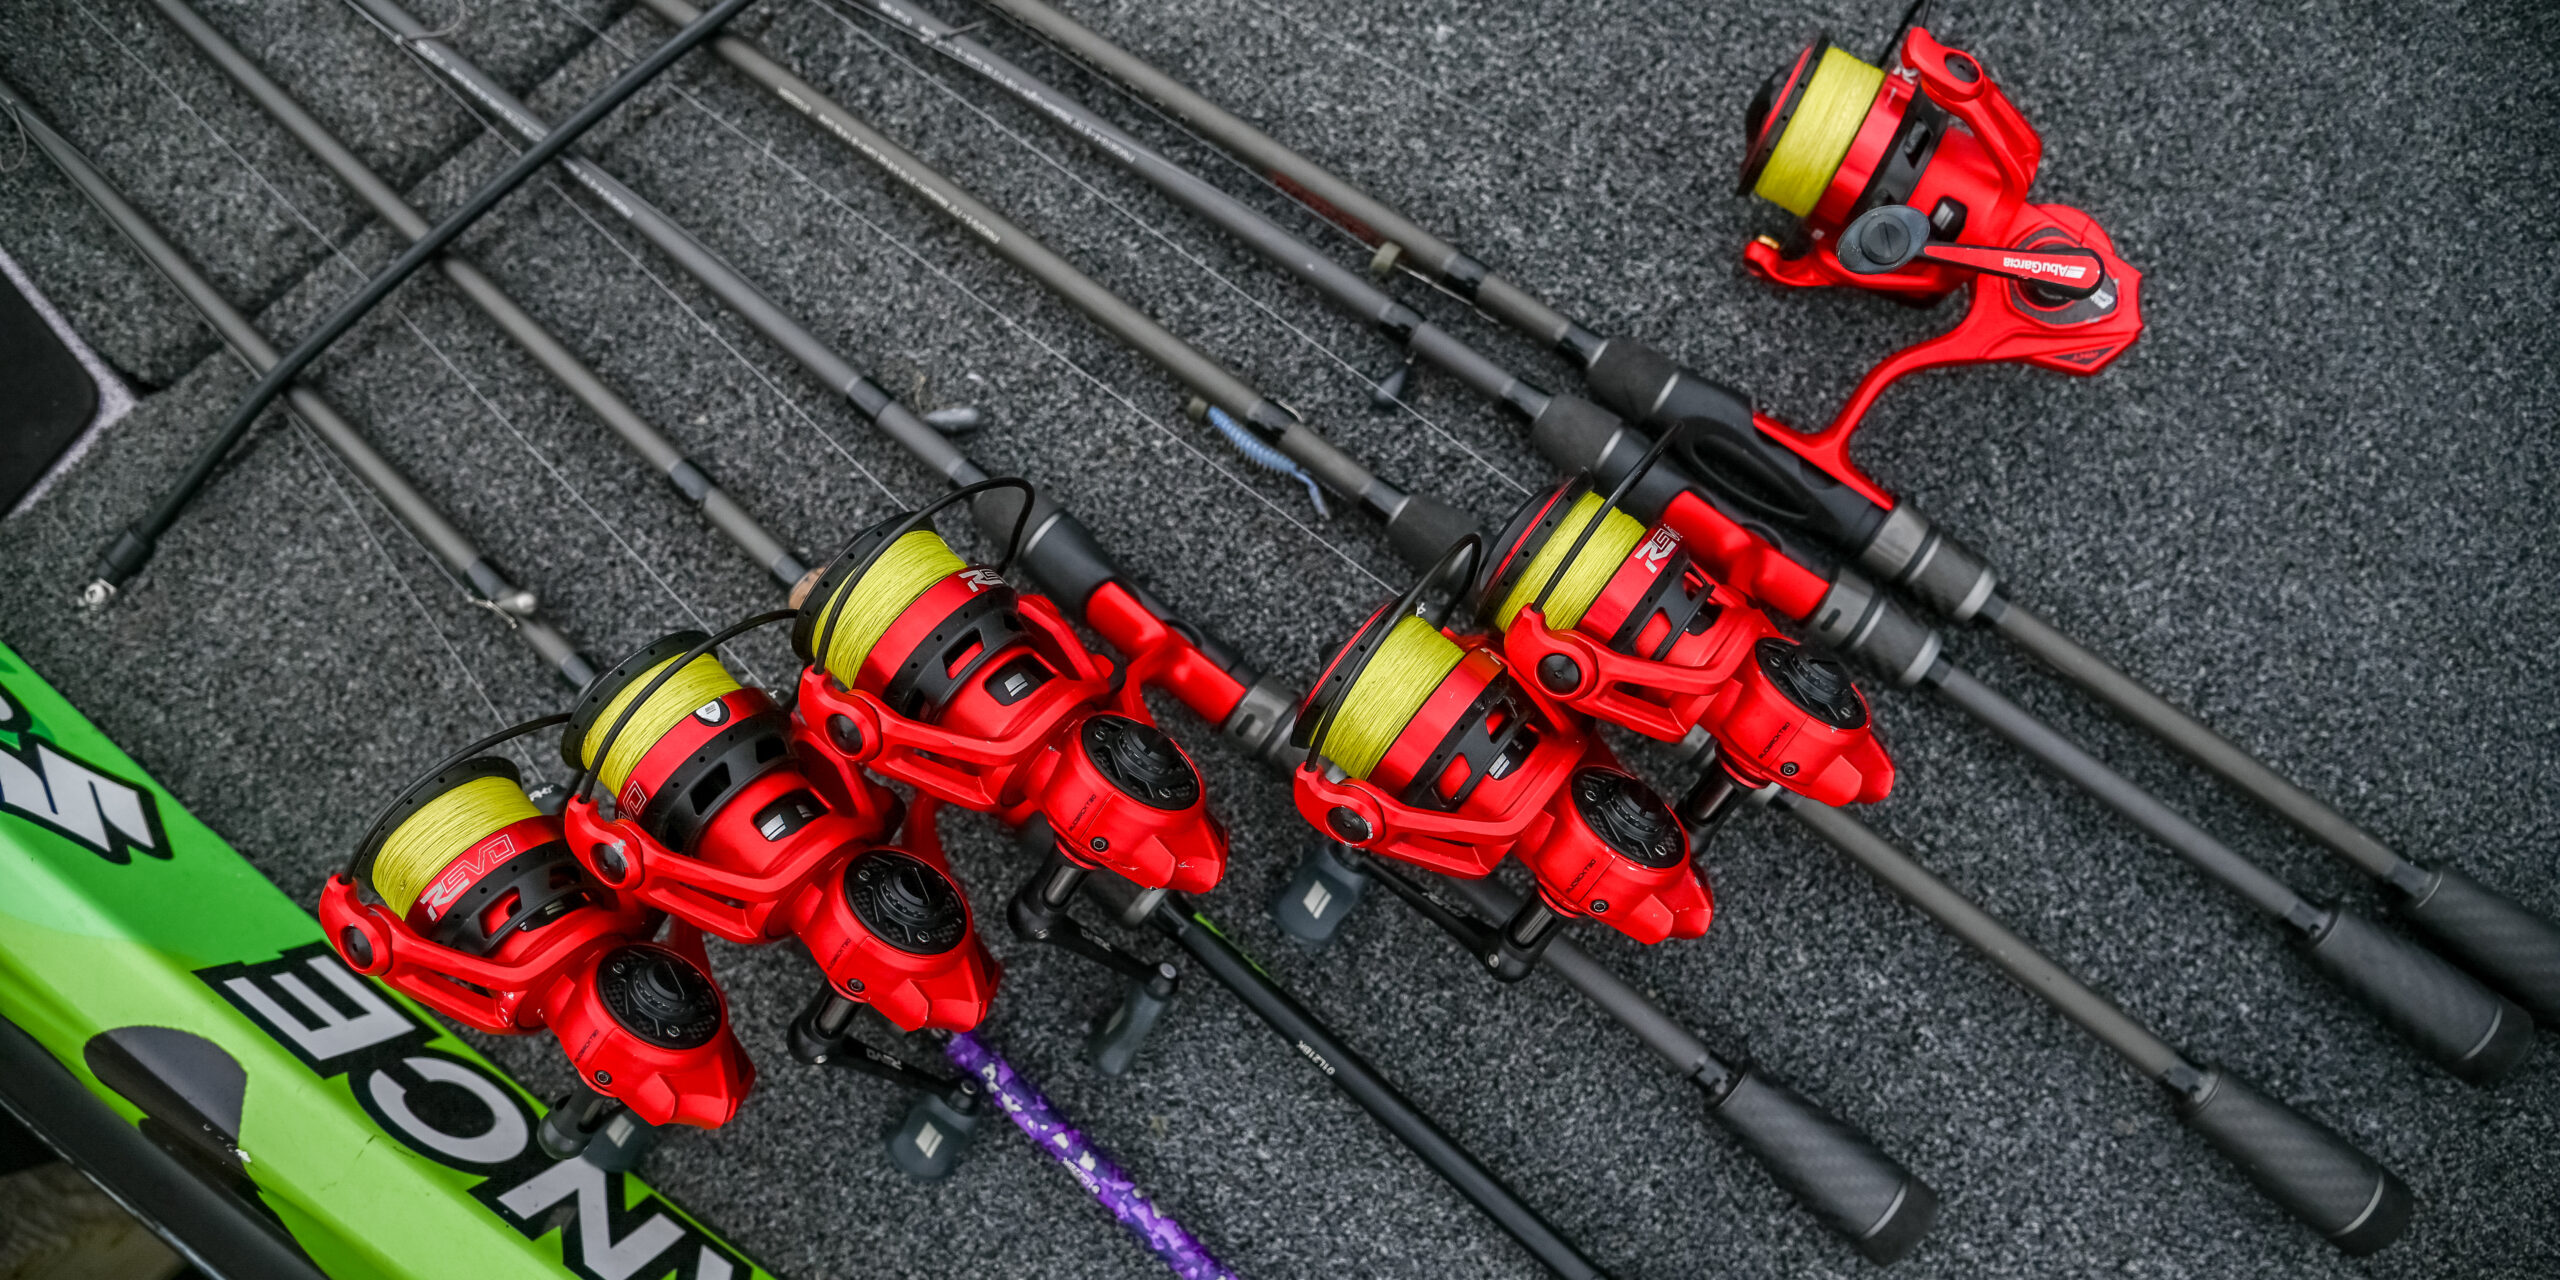 TOP 10 BAITS & PATTERNS: How the Top 10 caught 'em at Cayuga